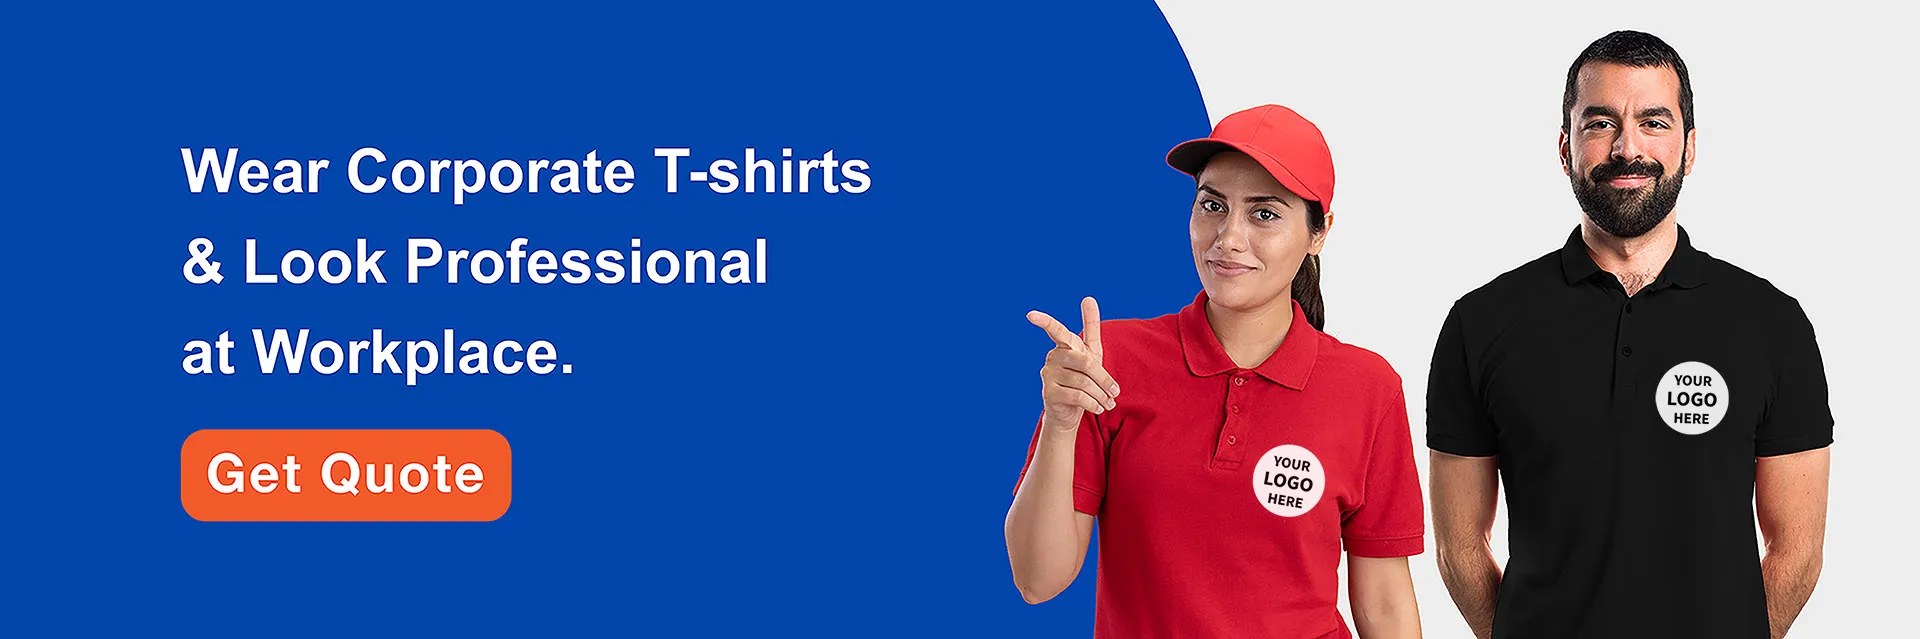 corporate t shirt manufacturers in chennai uniforms for companies restaurant hotels and industrial uniforms